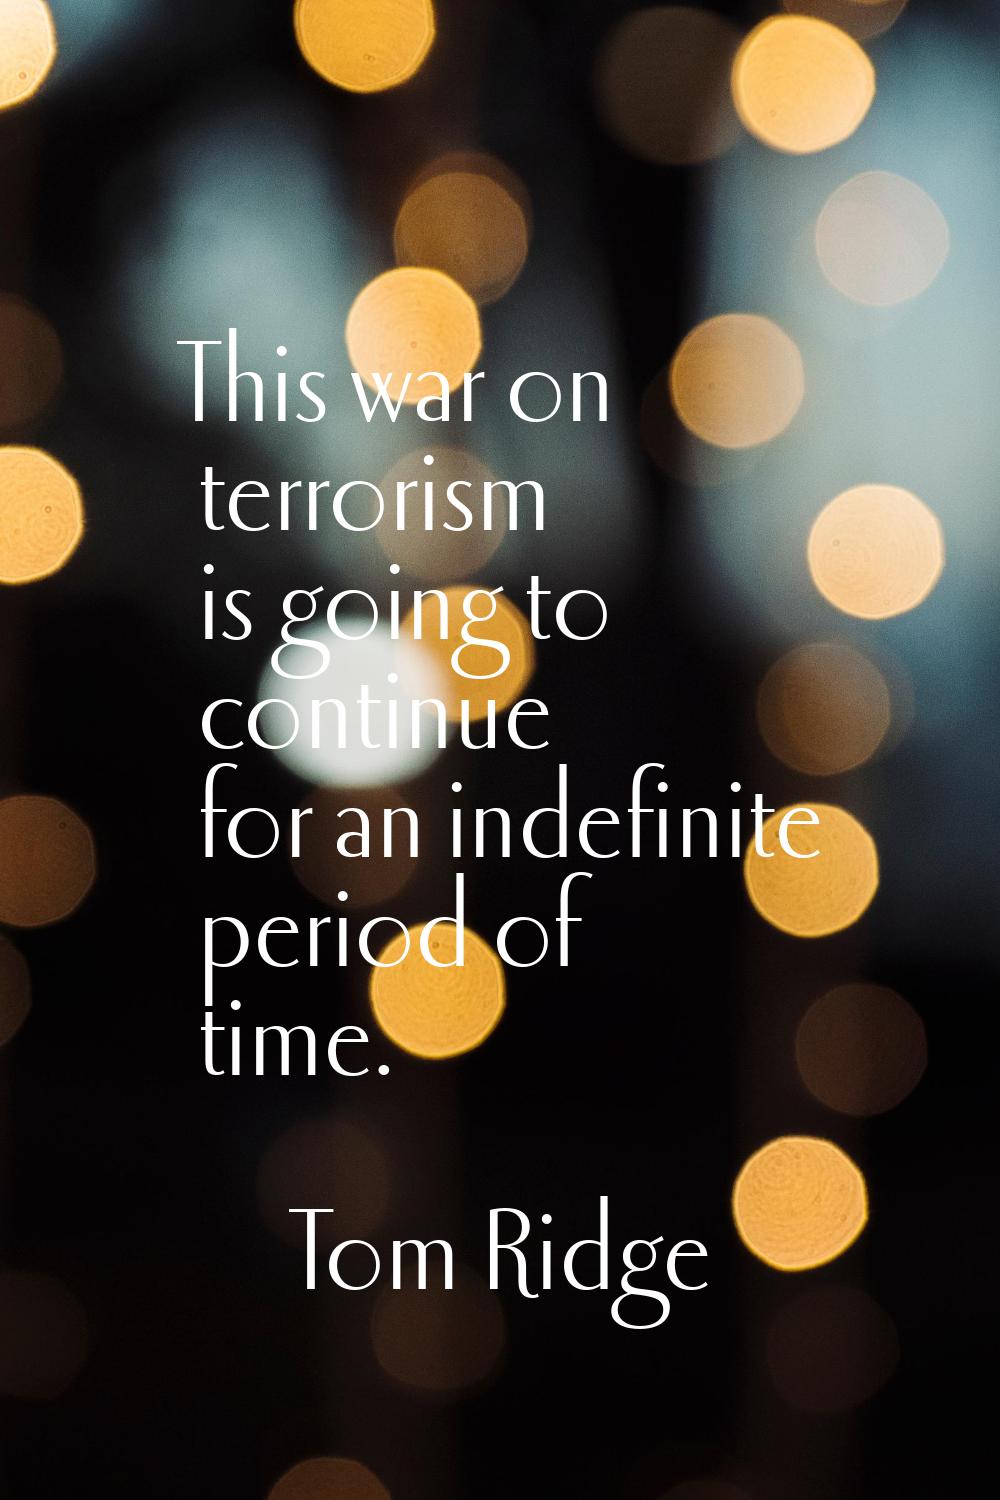 This war on terrorism is going to continue for an indefinite period of time.